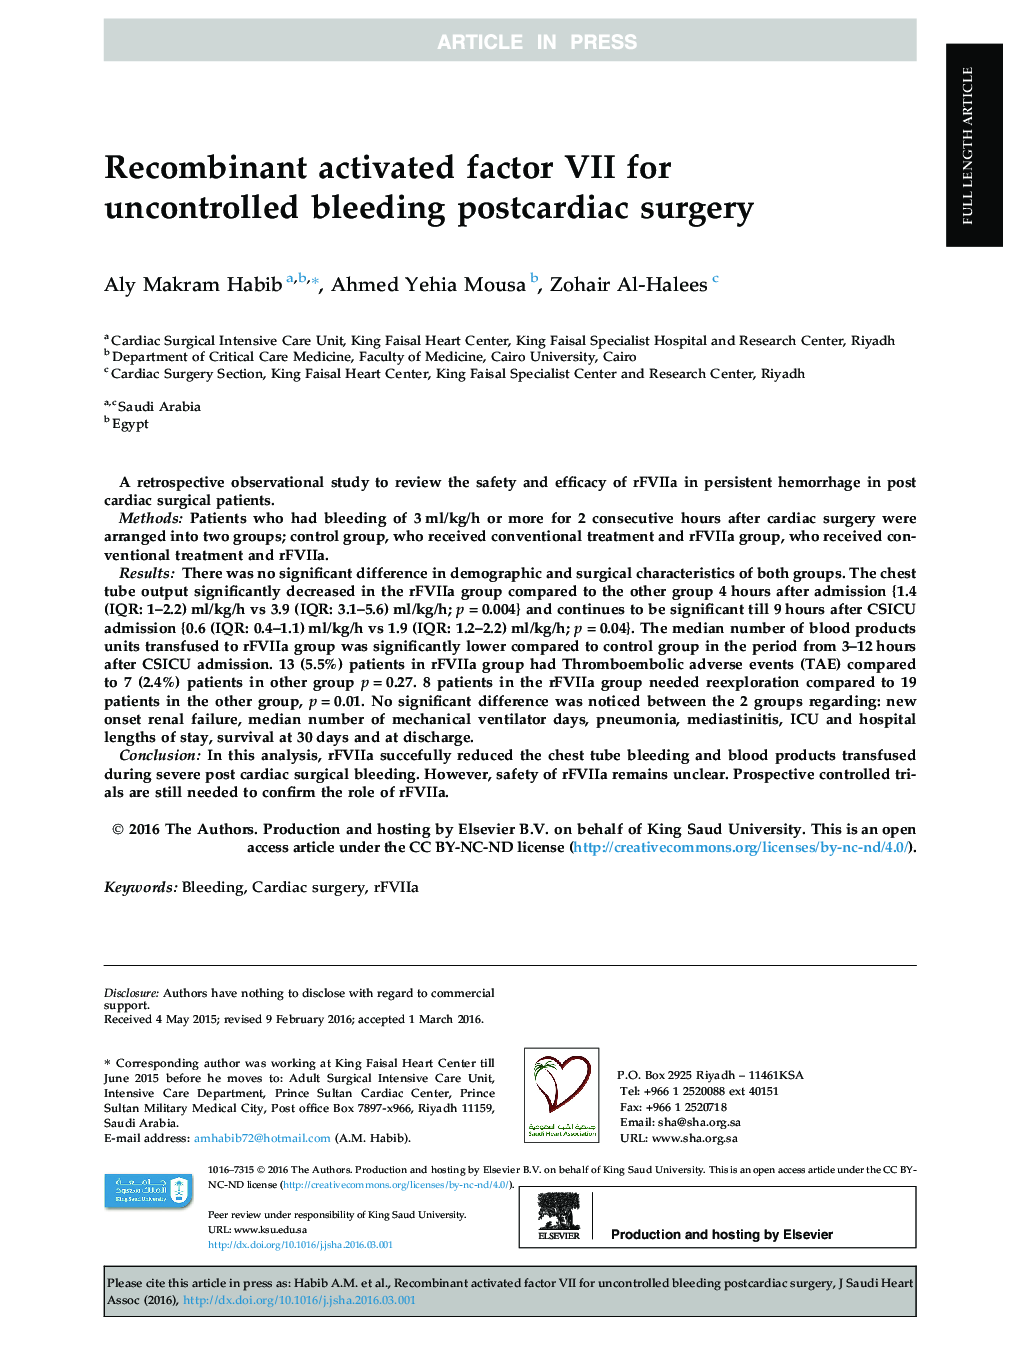 Recombinant activated factor VII for uncontrolled bleeding postcardiac surgery